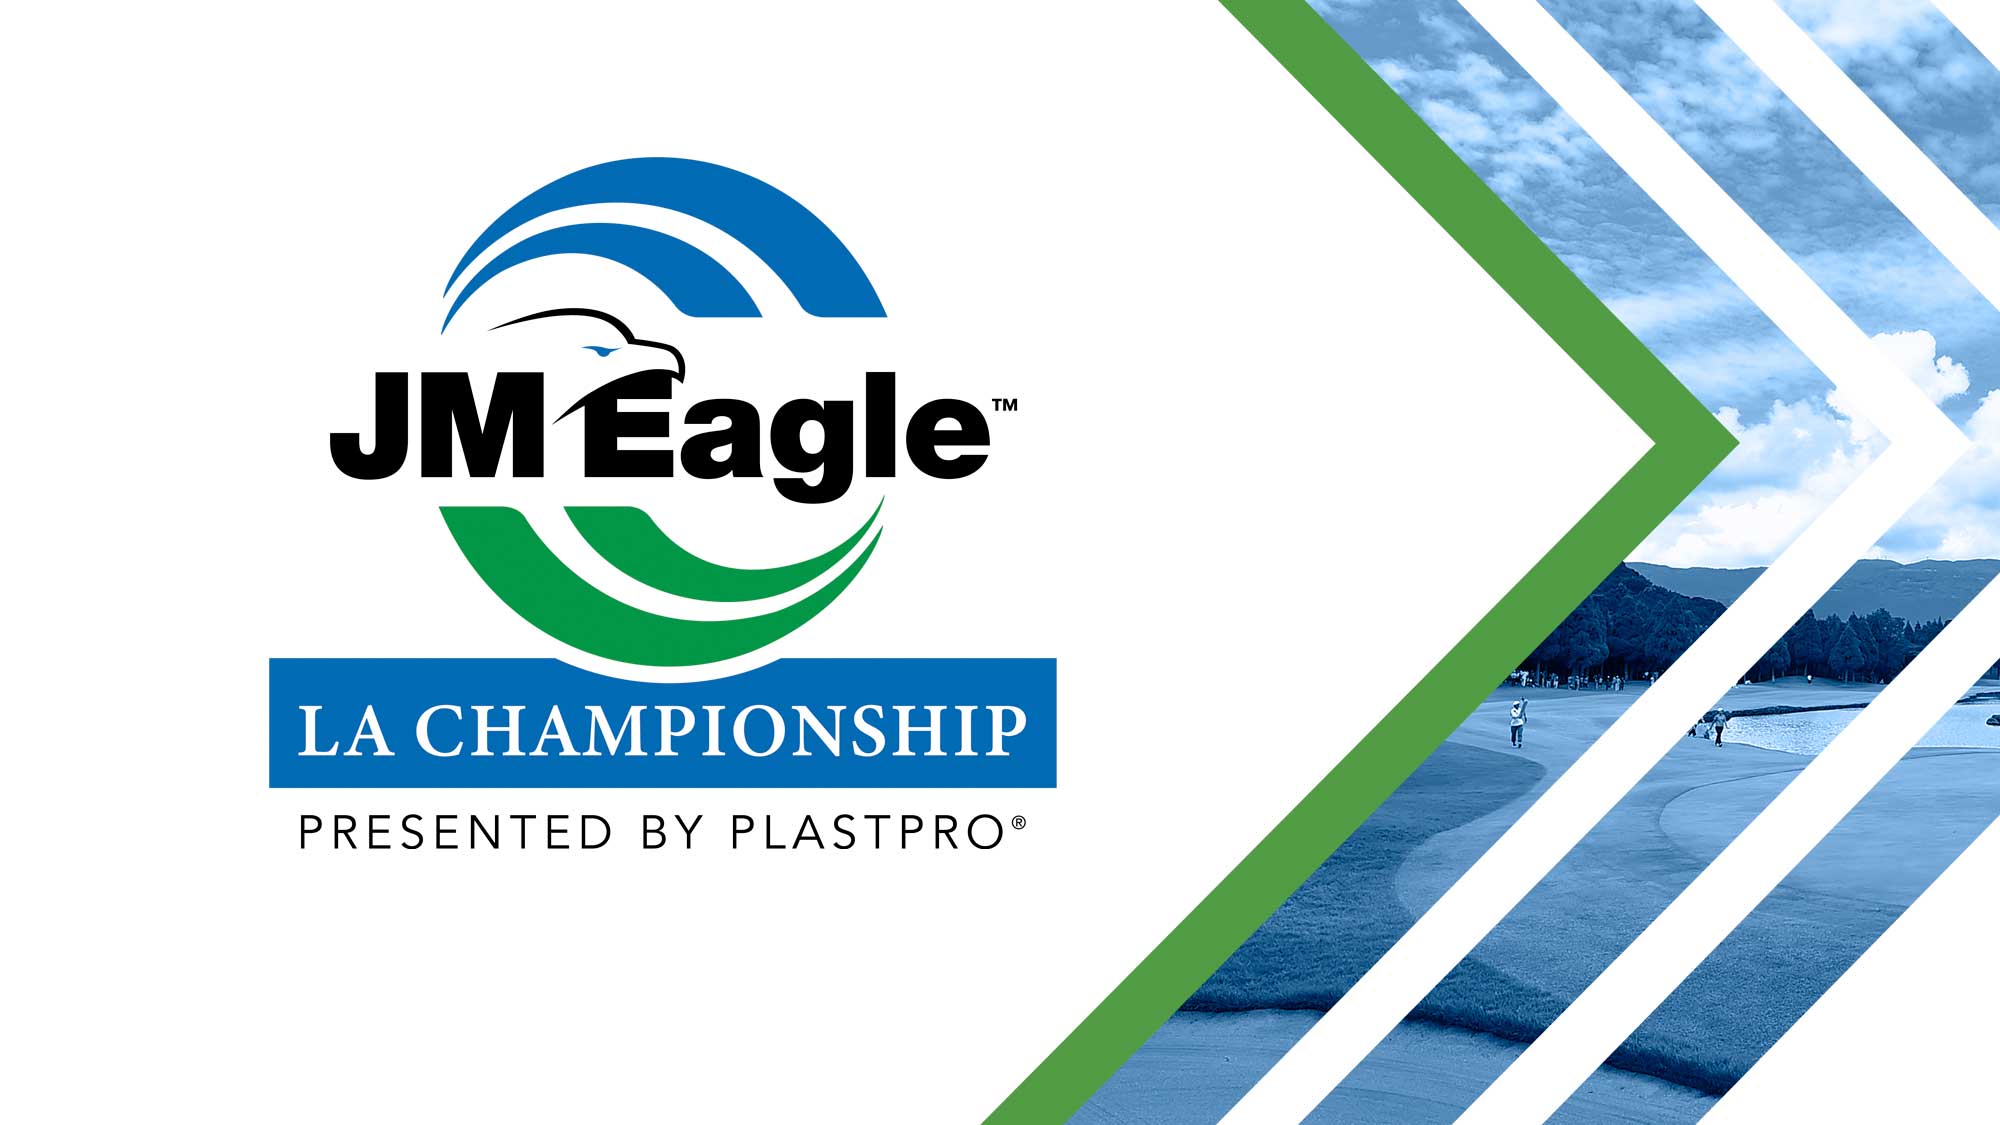 JM Eagle and Plastpro Announced as Title and Presenting Sponsor for Los